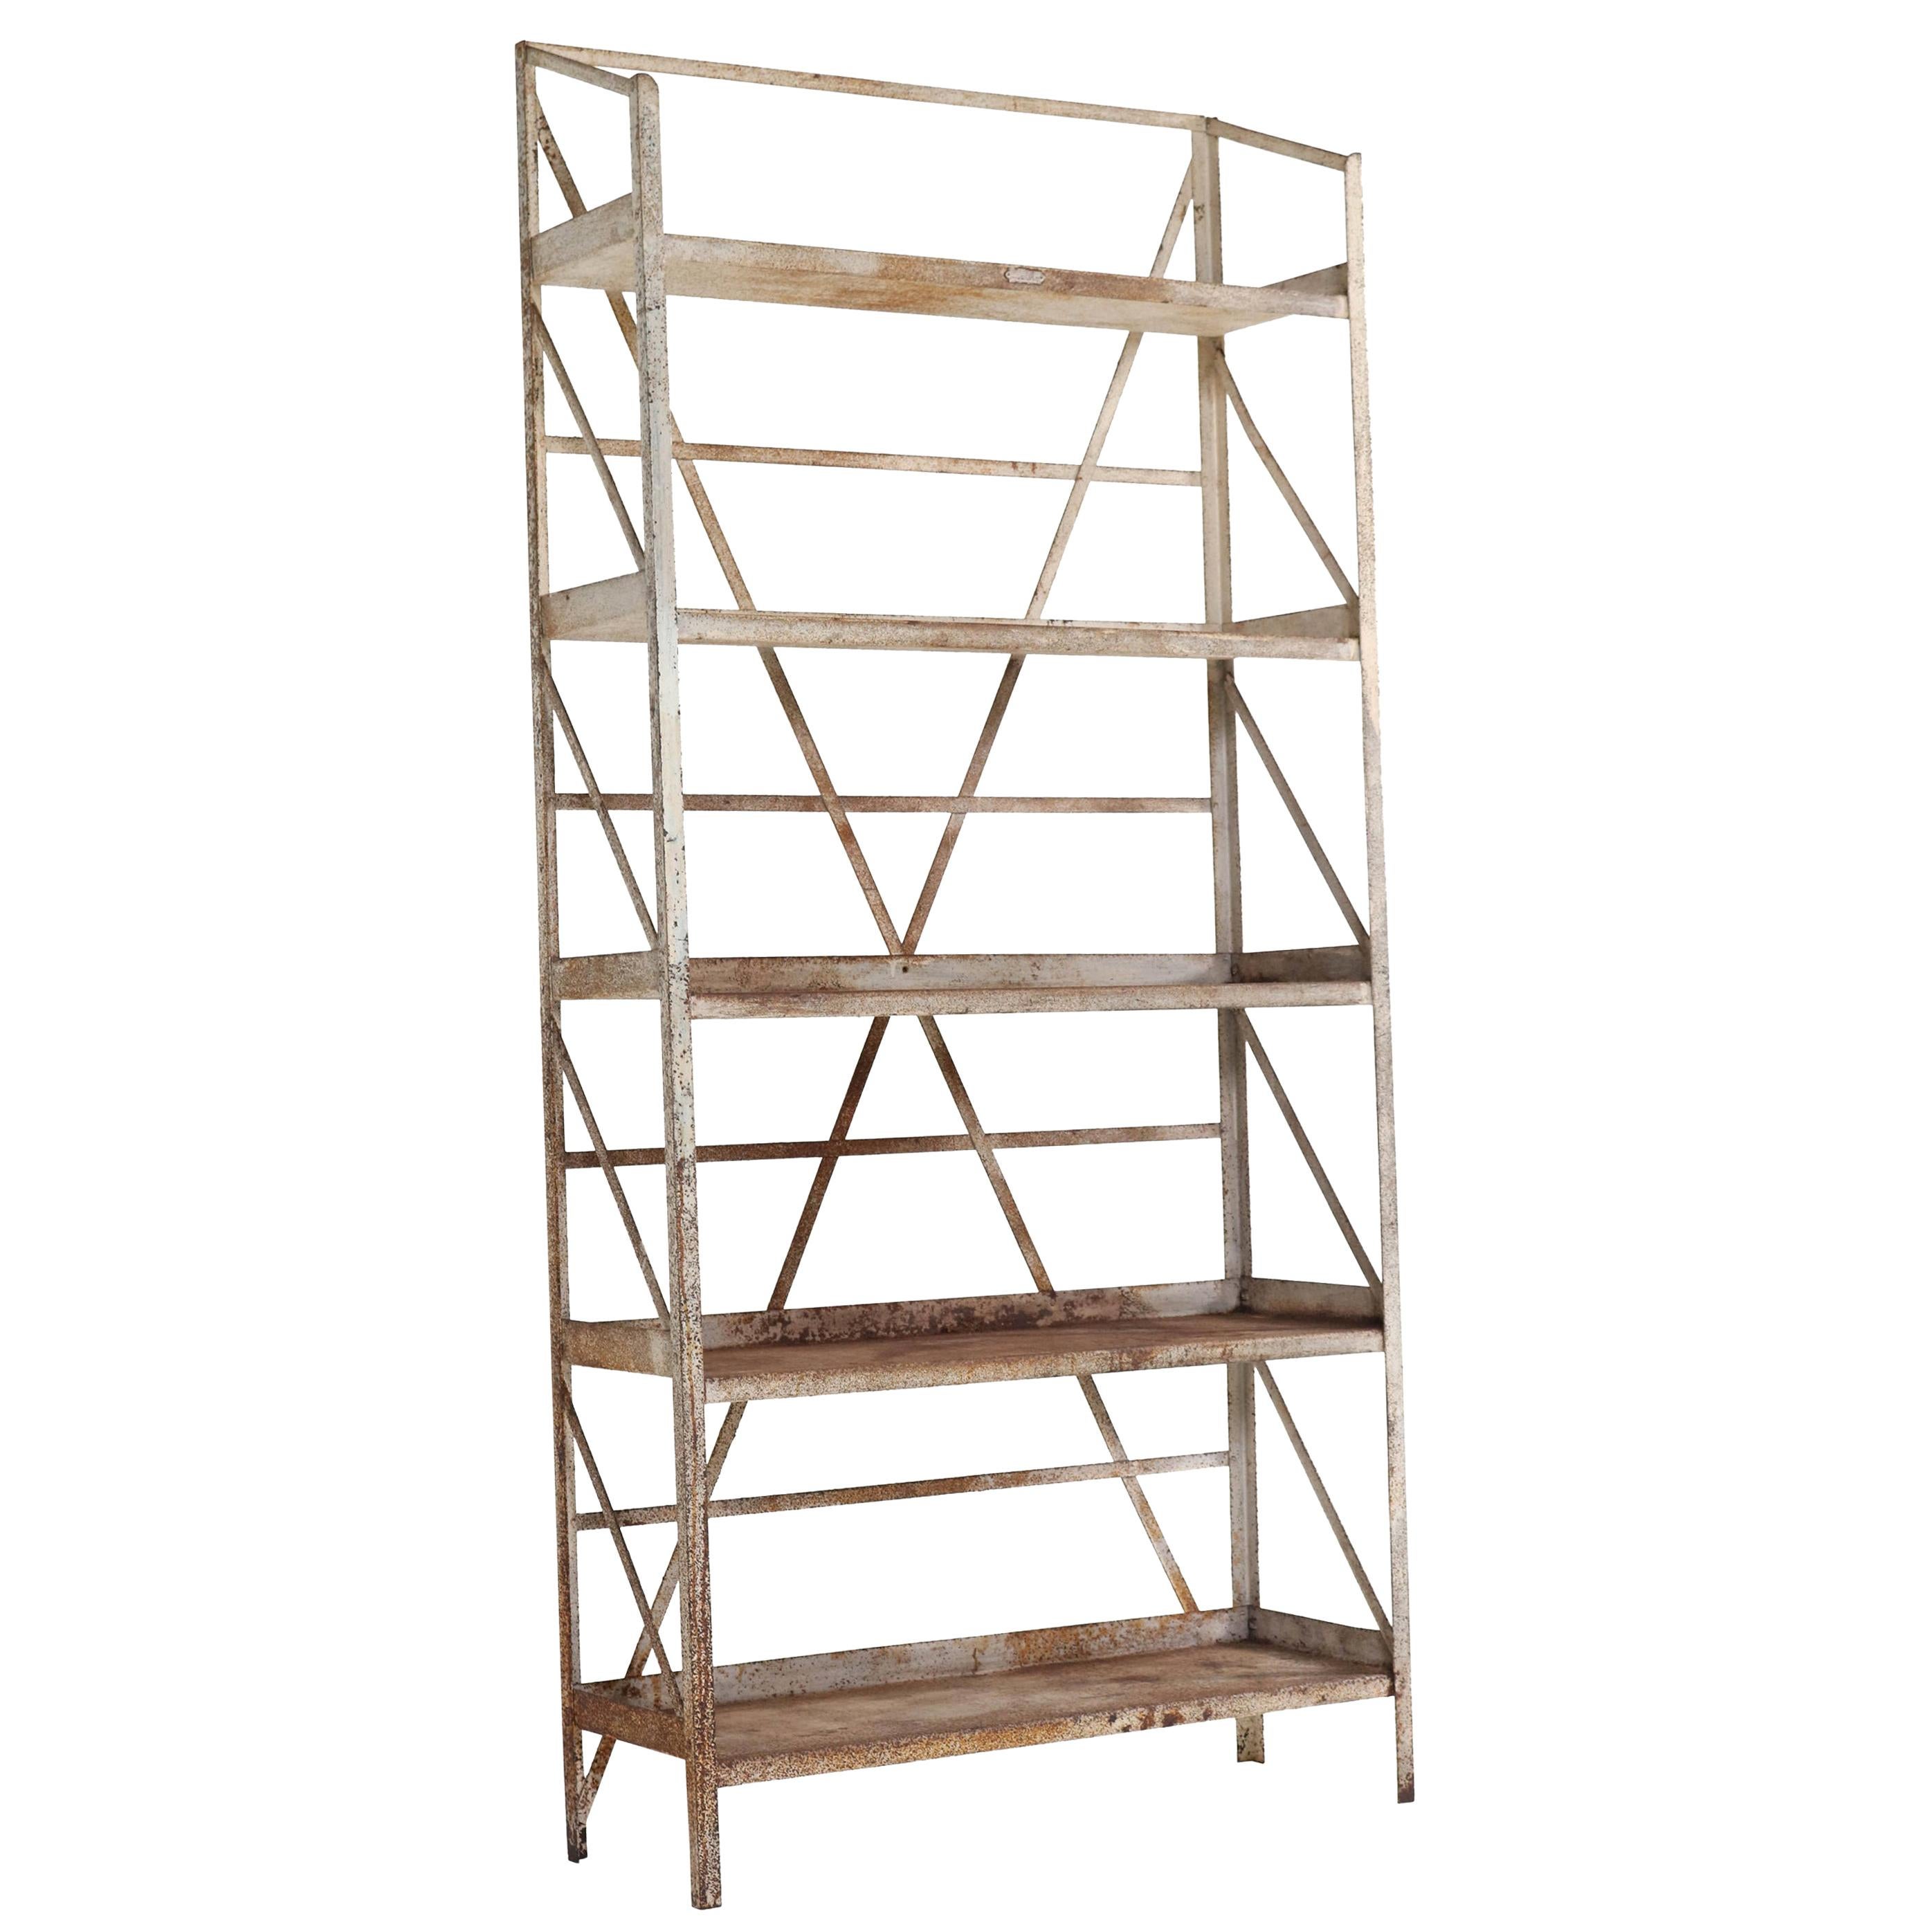 Dutch Industrial Steel Shelving Unit By, Industrial Retail Shelving